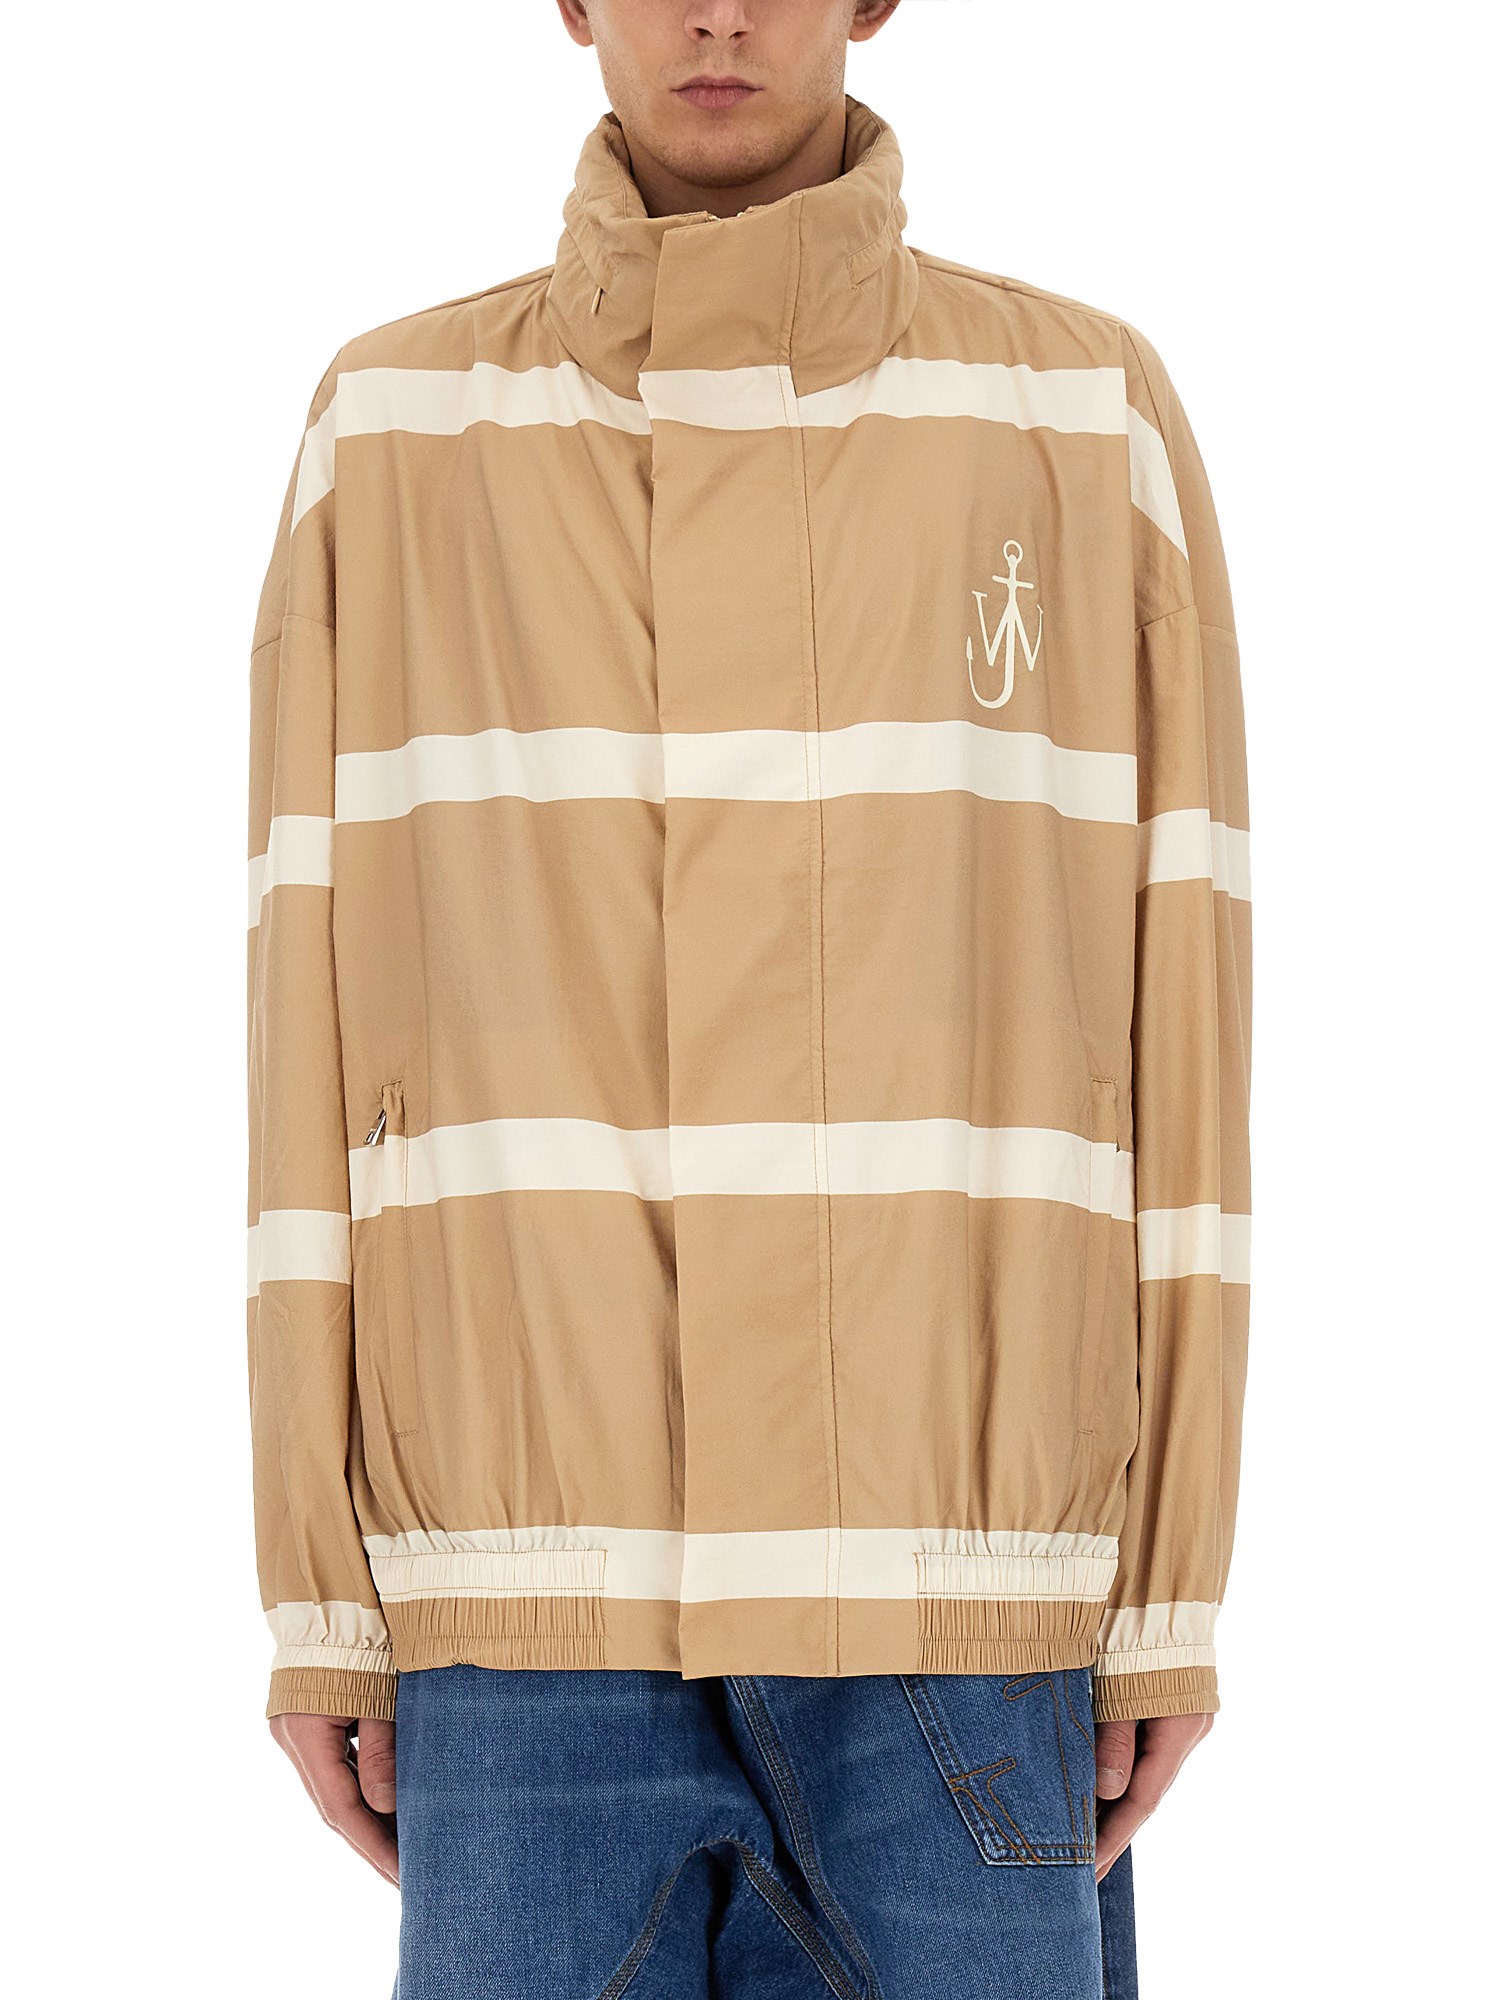 jw anderson jacket with logo